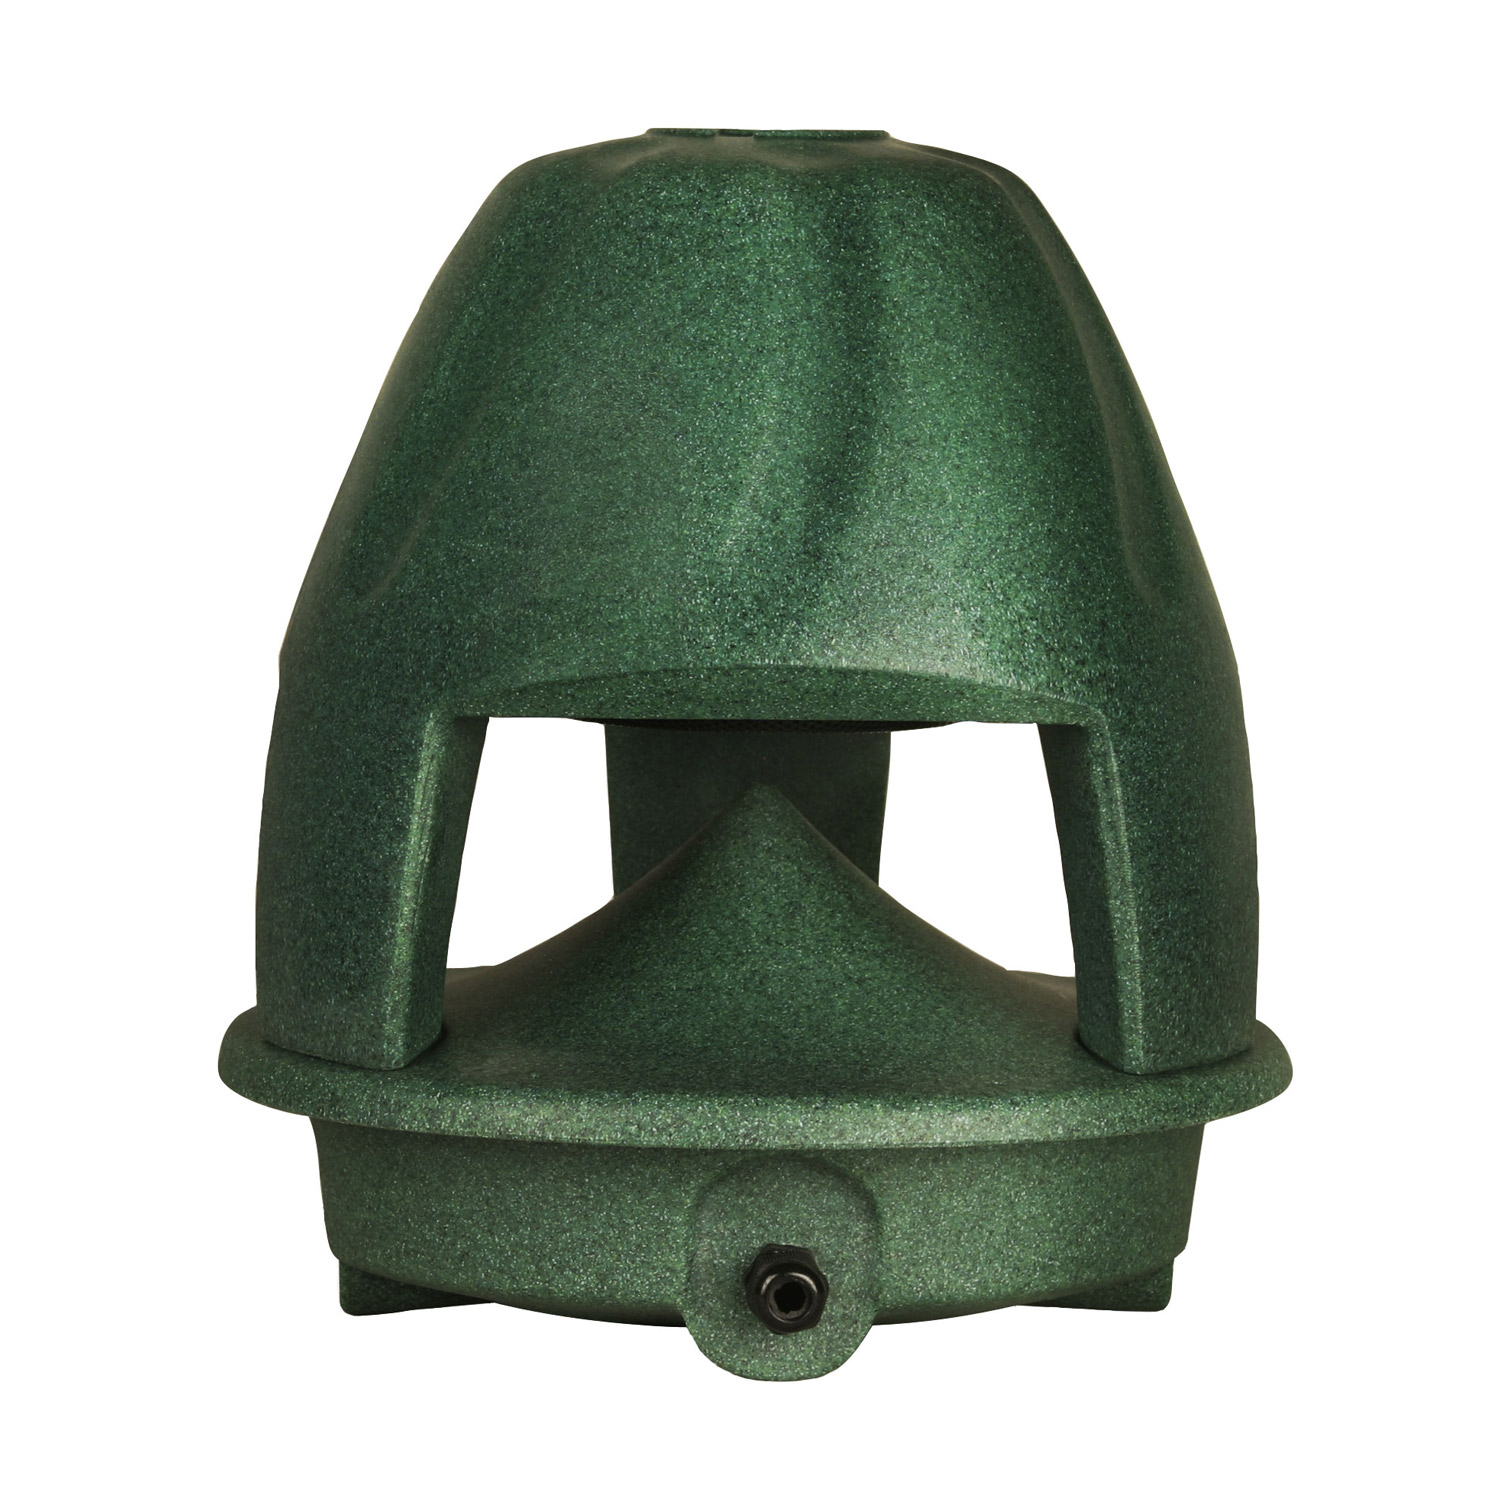 Phase SPF–55 2-way coaxial outdoor speaker (green)(each) - Click Image to Close